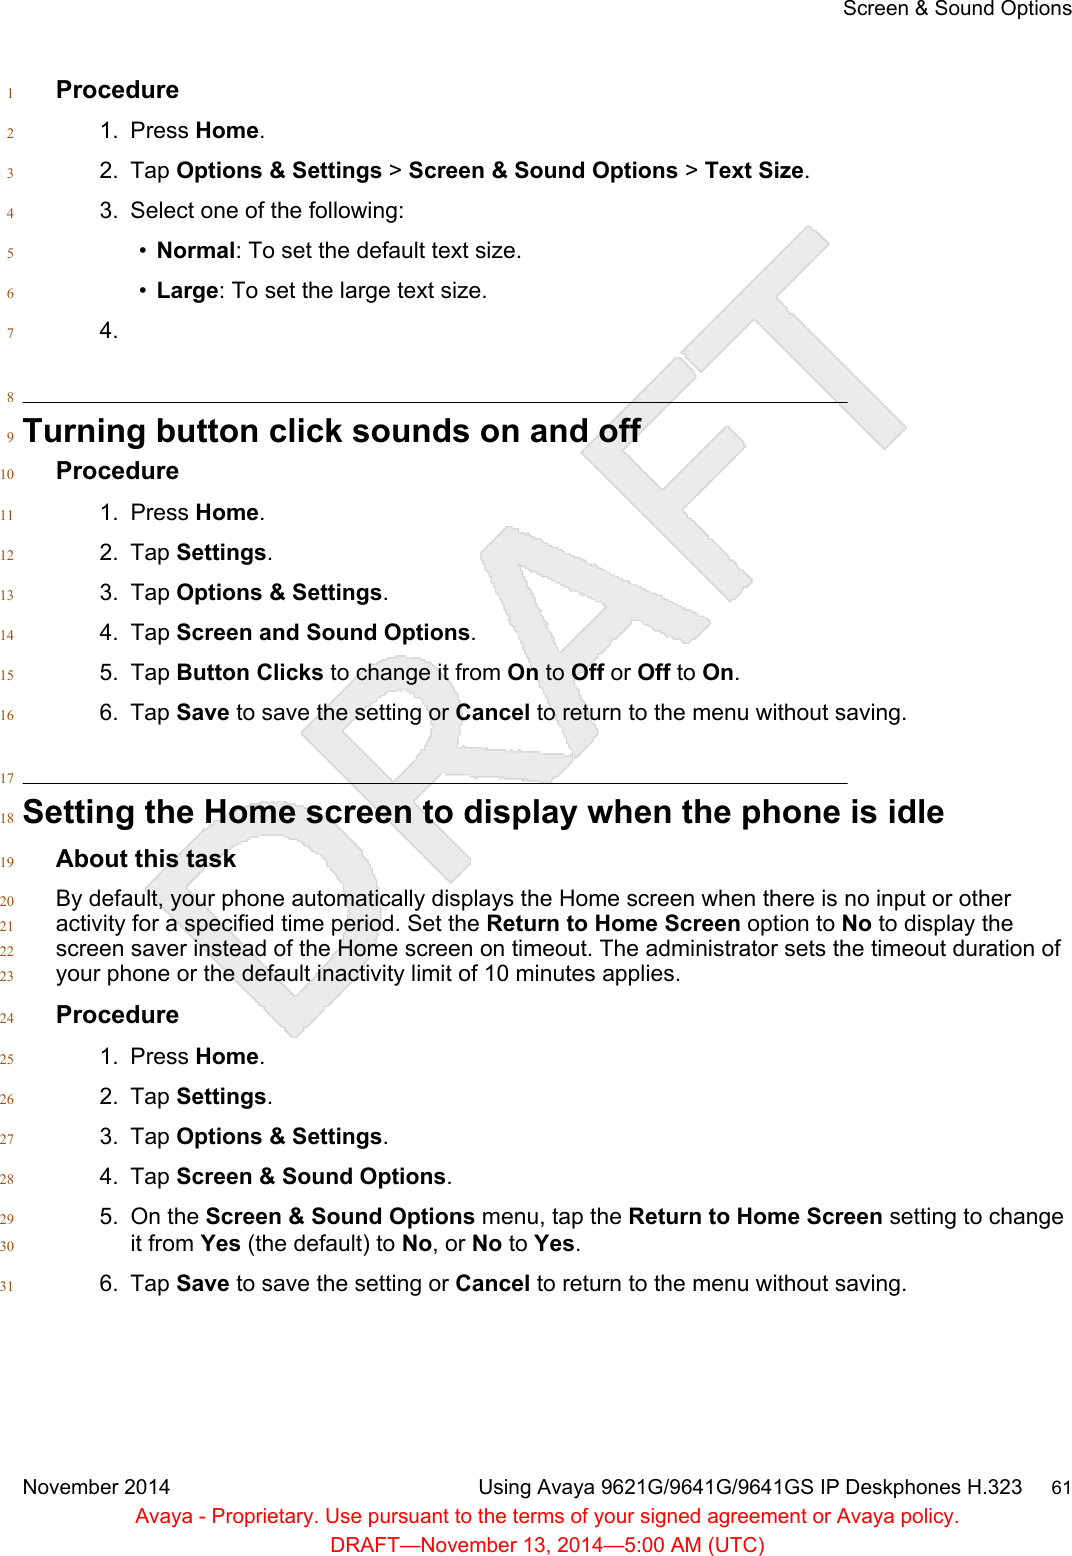 Procedure11. Press Home.22. Tap Options &amp; Settings &gt; Screen &amp; Sound Options &gt; Text Size.33. Select one of the following:4•Normal: To set the default text size.5•Large: To set the large text size.64.78Turning button click sounds on and off9Procedure101. Press Home.112. Tap Settings.123. Tap Options &amp; Settings.134. Tap Screen and Sound Options.145. Tap Button Clicks to change it from On to Off or Off to On.156. Tap Save to save the setting or Cancel to return to the menu without saving.1617Setting the Home screen to display when the phone is idle18About this task19By default, your phone automatically displays the Home screen when there is no input or other20activity for a specified time period. Set the Return to Home Screen option to No to display the21screen saver instead of the Home screen on timeout. The administrator sets the timeout duration of22your phone or the default inactivity limit of 10 minutes applies.23Procedure241. Press Home.252. Tap Settings.263. Tap Options &amp; Settings.274. Tap Screen &amp; Sound Options.285. On the Screen &amp; Sound Options menu, tap the Return to Home Screen setting to change29it from Yes (the default) to No, or No to Yes.306. Tap Save to save the setting or Cancel to return to the menu without saving.31Screen &amp; Sound OptionsNovember 2014 Using Avaya 9621G/9641G/9641GS IP Deskphones H.323     61Avaya - Proprietary. Use pursuant to the terms of your signed agreement or Avaya policy.DRAFT—November 13, 2014—5:00 AM (UTC)